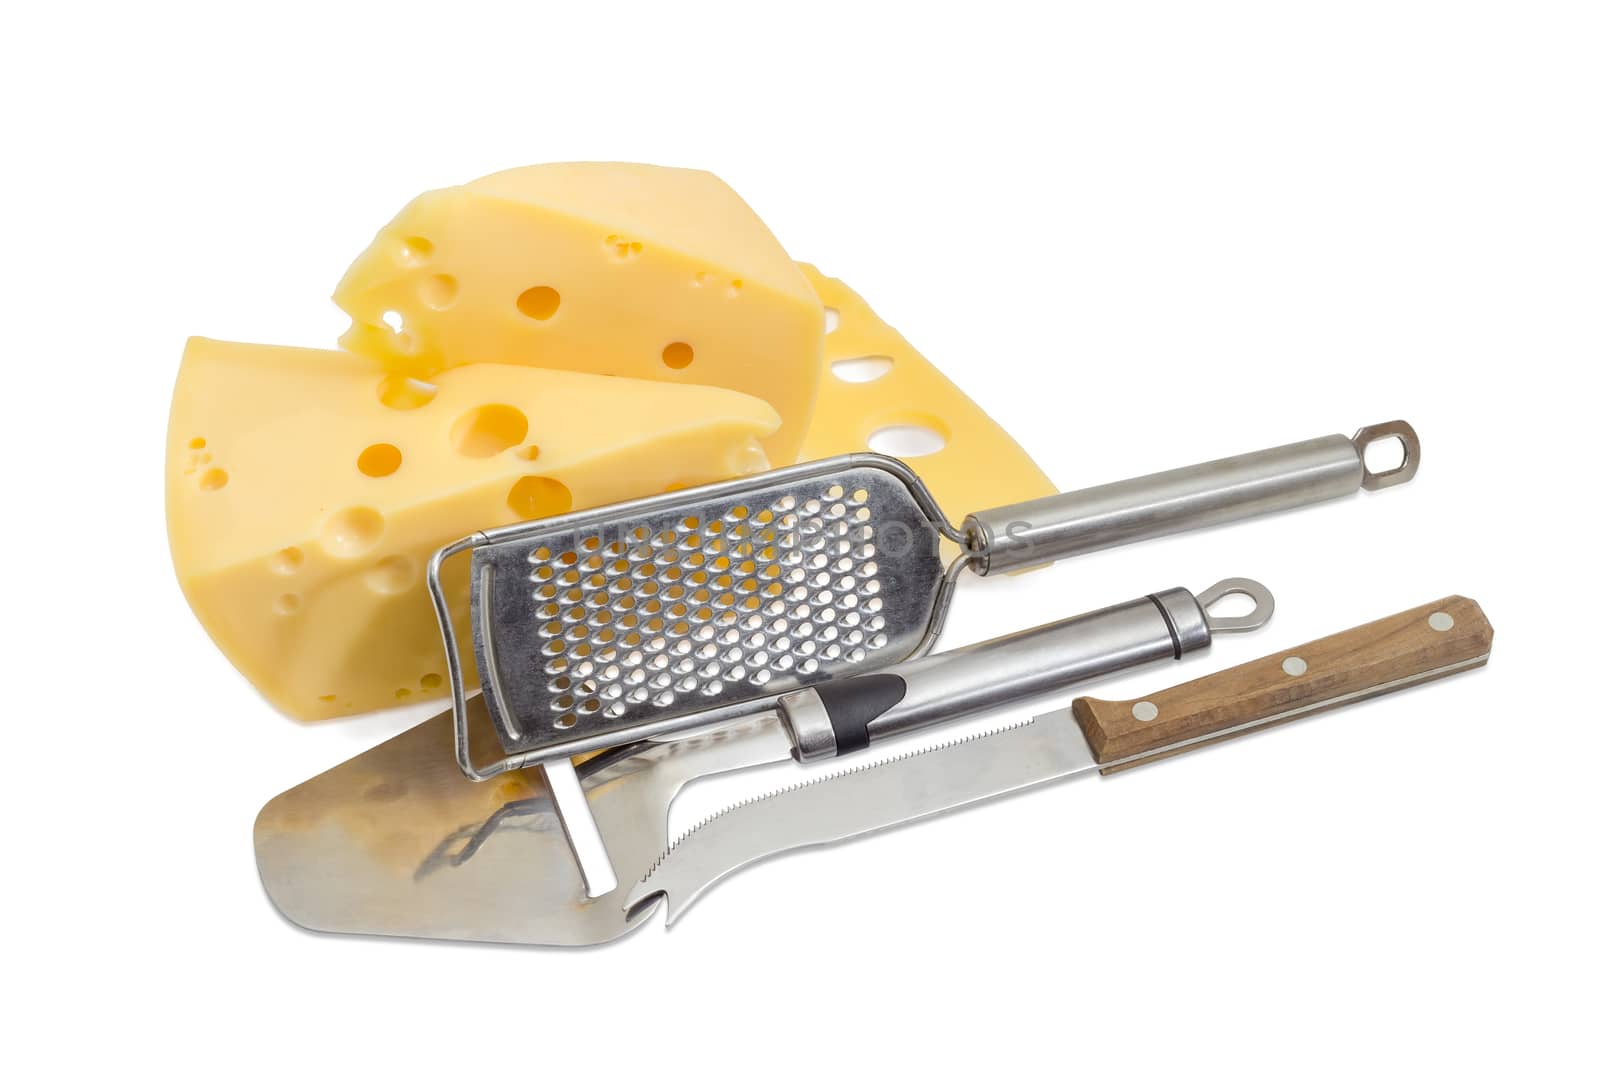 Cheese knife, cheese slicer, cheese grater and semi-hard cheese by anmbph